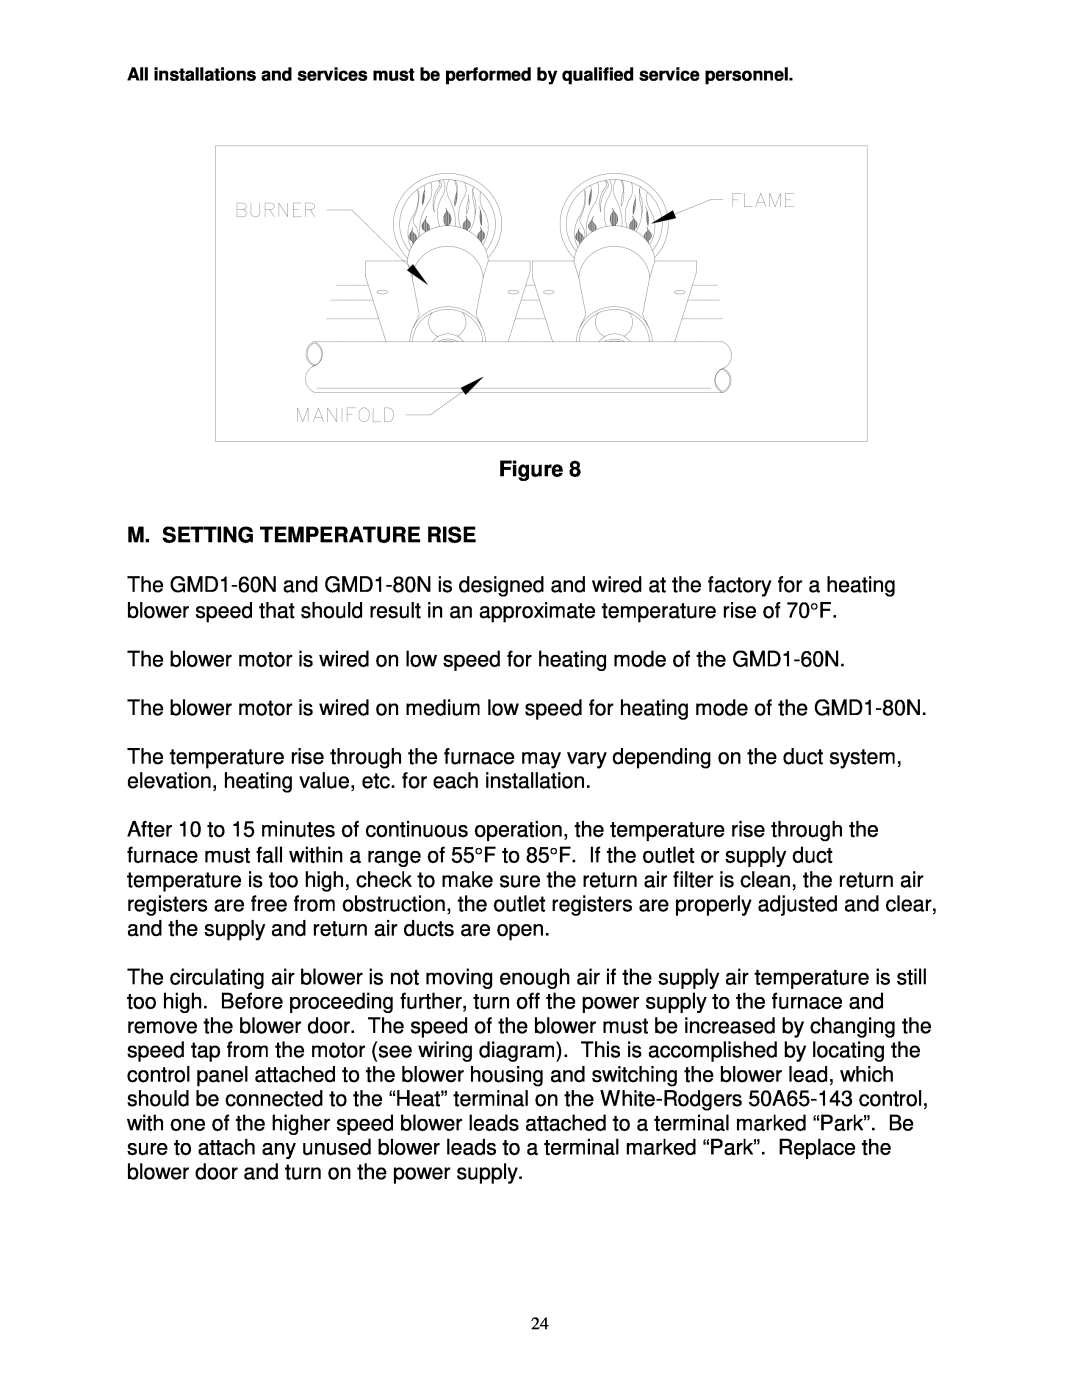 Thermo Products GMD1-60N, GDM1-80N service manual Figure M. SETTING TEMPERATURE RISE 